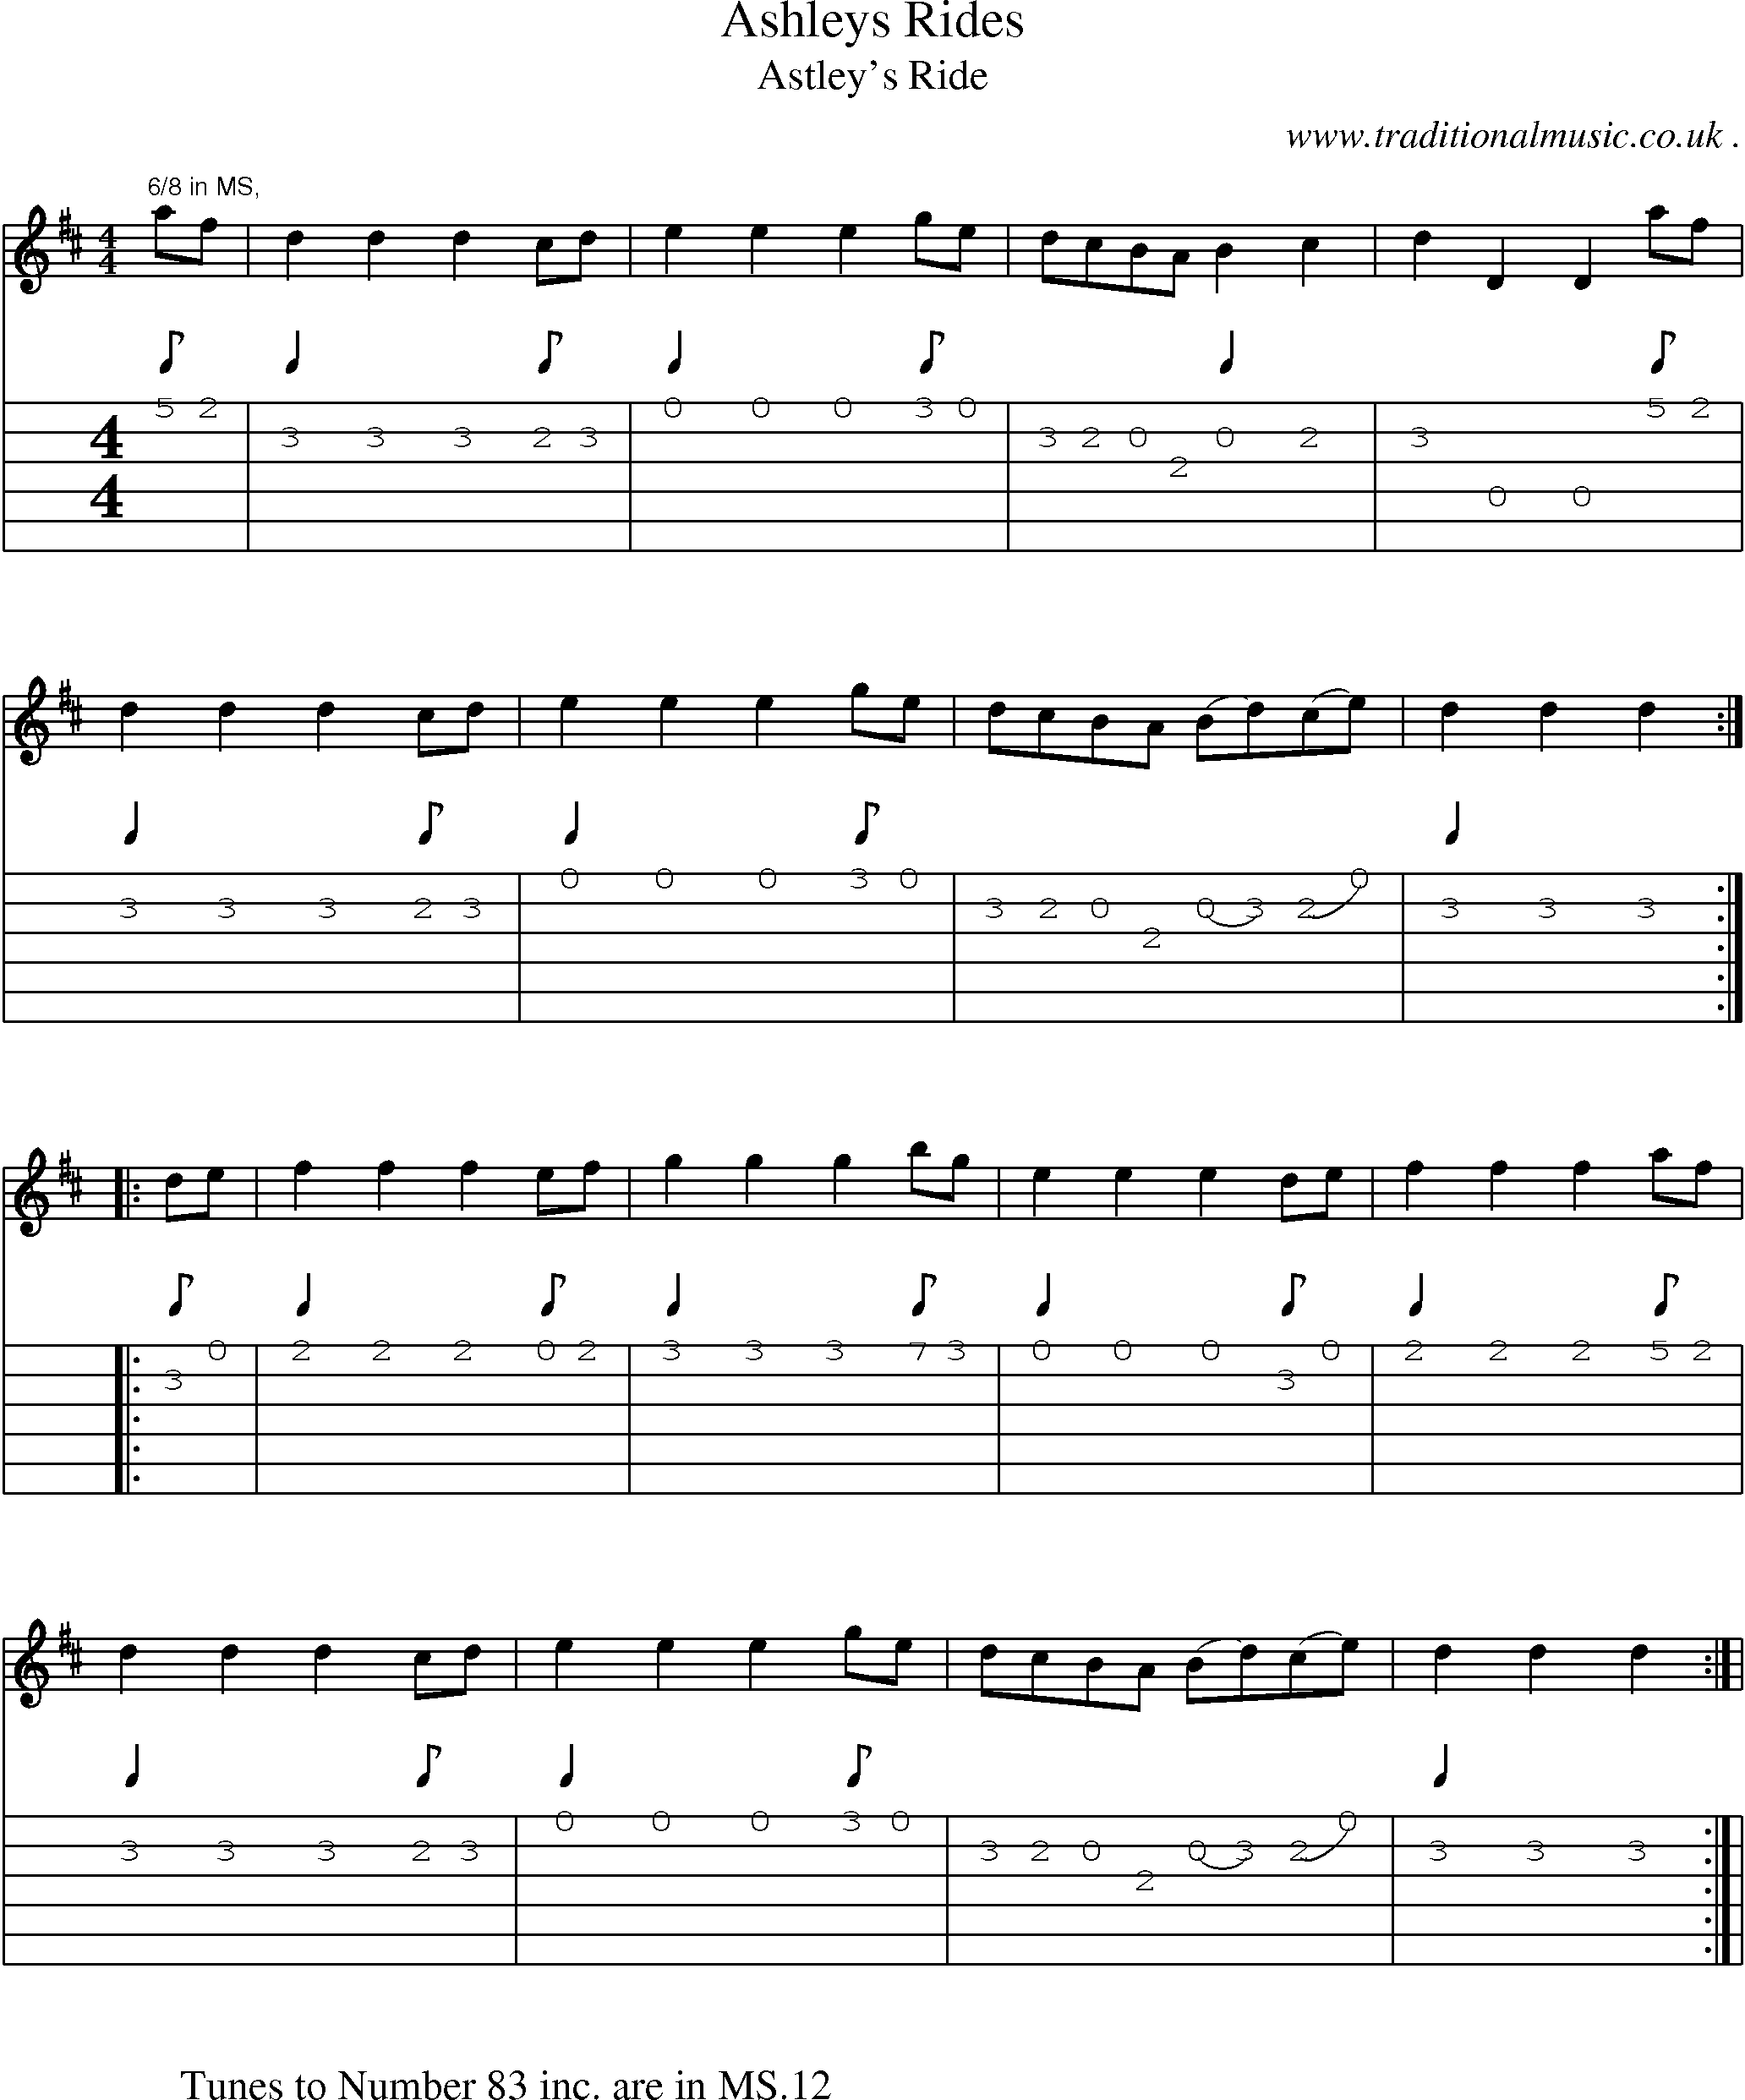 Sheet-Music and Guitar Tabs for Ashleys Rides